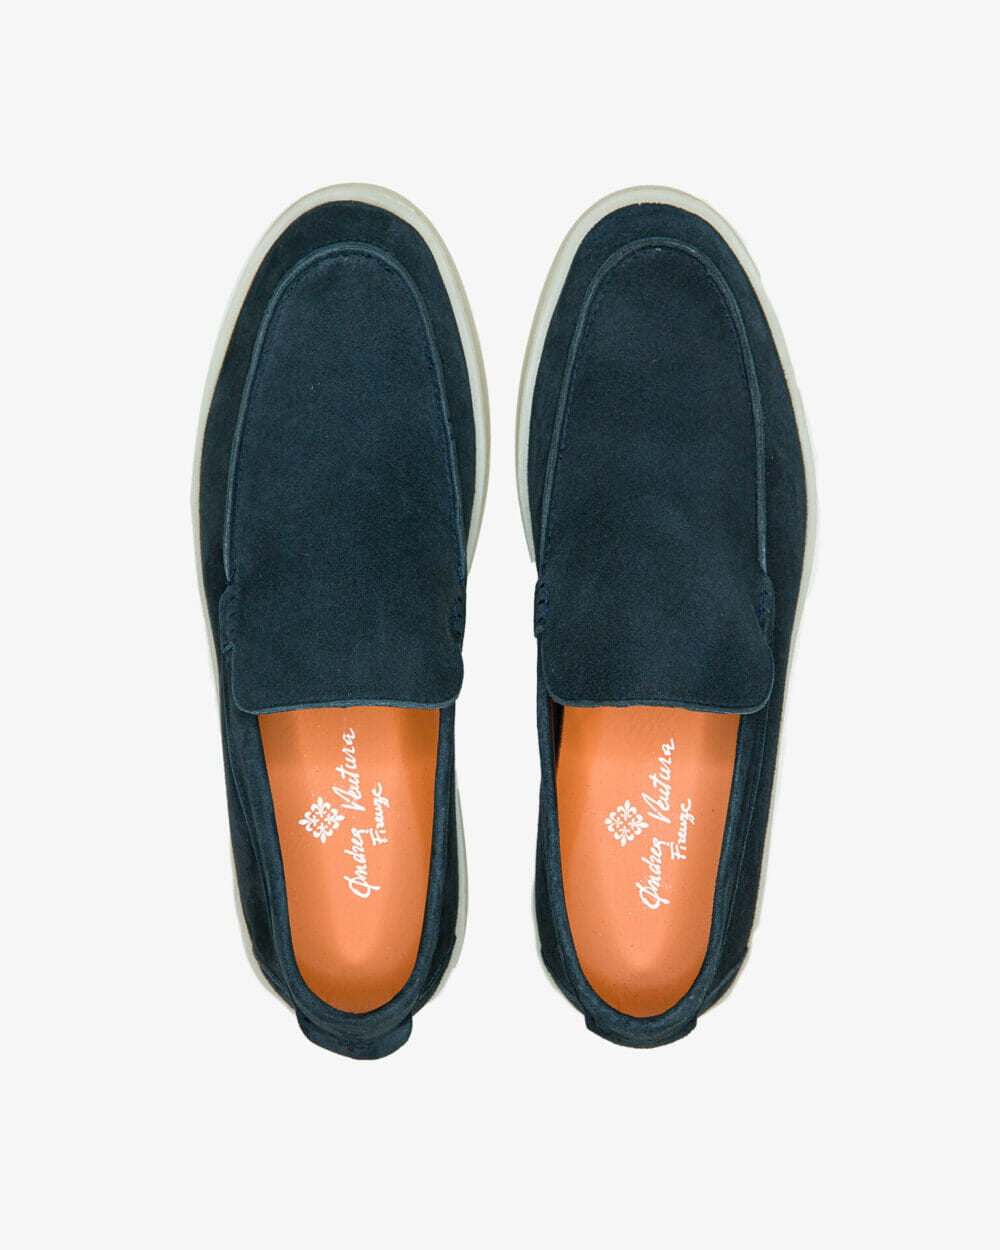 St-Bart-LS-eclipse-blue-suede-from-above